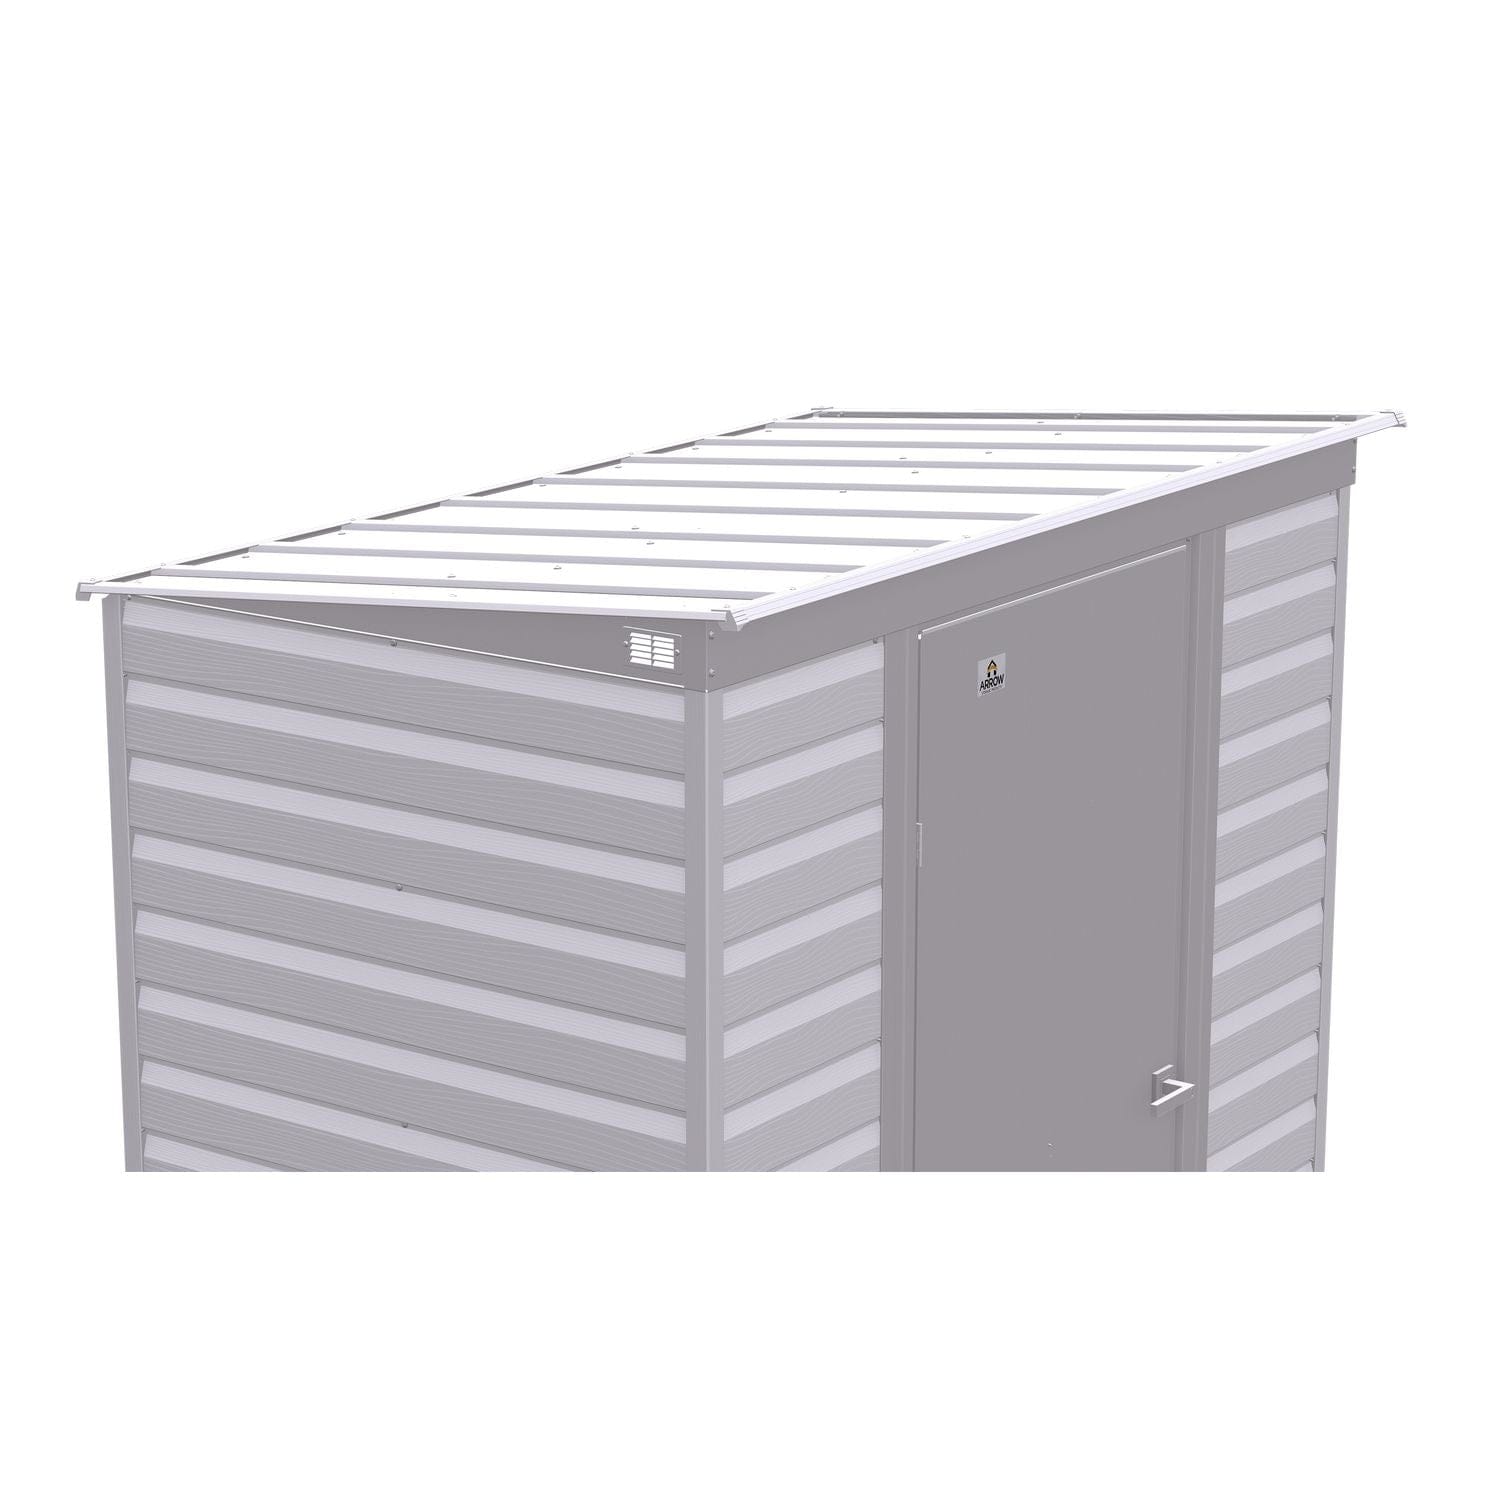 Arrow Sheds & Storage Buildings Arrow | Select Pent Roof Steel Storage Shed, 6x4 ft., Flute Grey SCP64FG